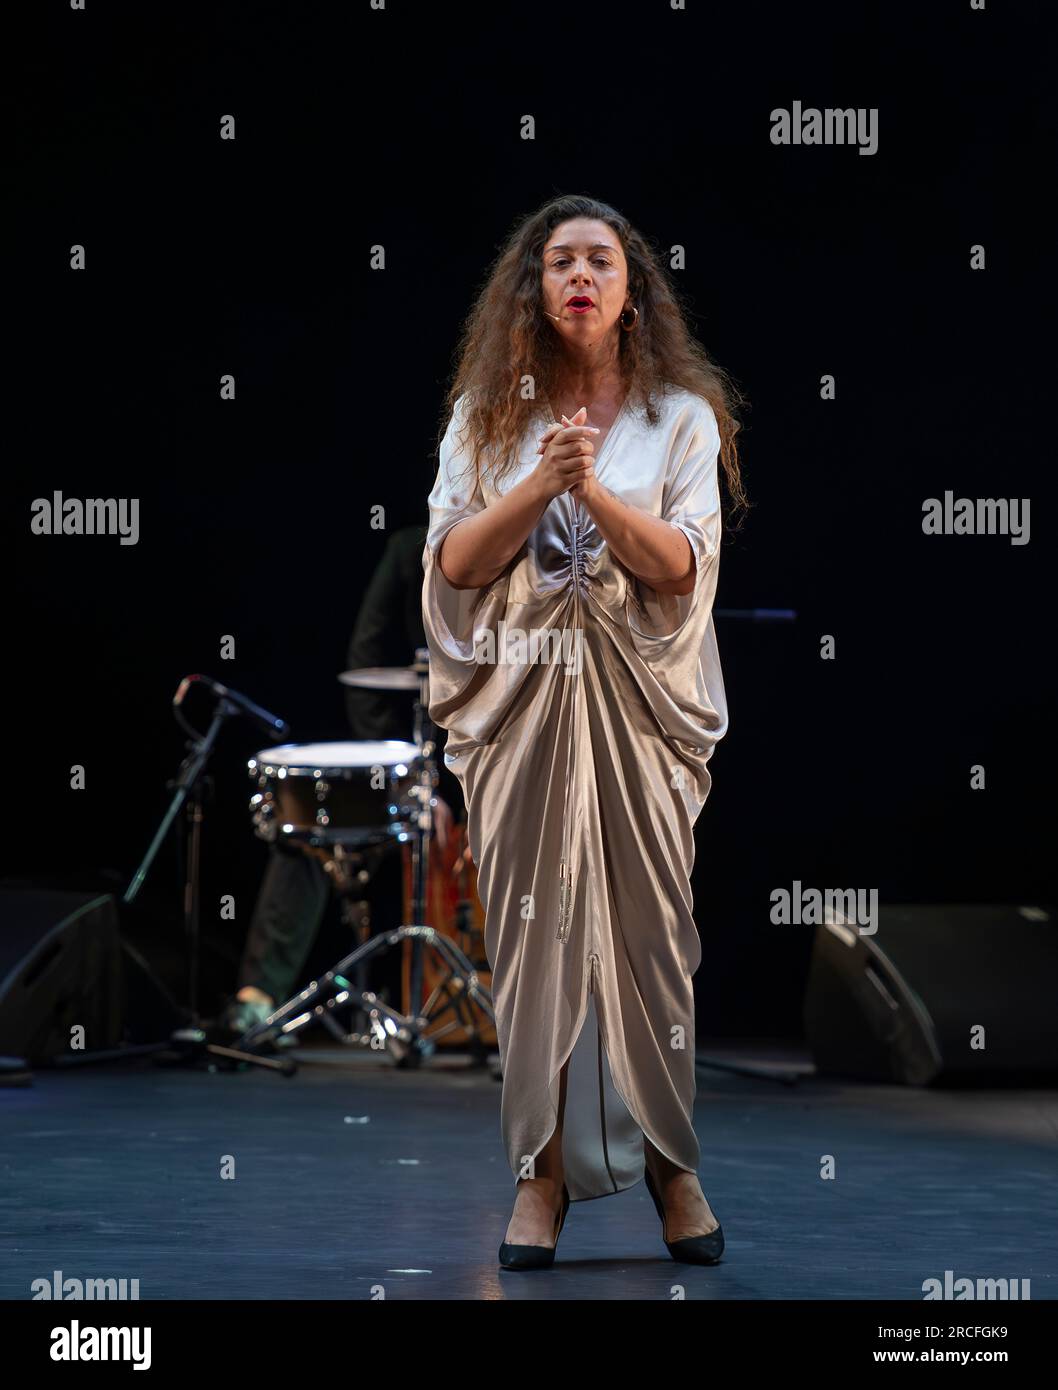 Flamenco Festival 2023, Sadlers Wells, London, UK. 14 July 2023. GALA FLAMENCA (14-15 July) is the anticipated intergenerational all-male production featuring Manuel Liñán, Alfonso de Losa, El Yiyo and Carrete de Málaga. Liñán returns to Sadler's Wells after the acclaimed ¡VIVA! in 2022, with Alfonso de Losa. The two carry their reputation as mavericks of the flamenco world to look past gender in this piece and project all of flamenco's history onto their own bodies. They are joined by 27-year-old talent Miguel Fernández Ribas, known as El Yiyo. Credit: Malcolm Park/Alamy Live News Stock Photo